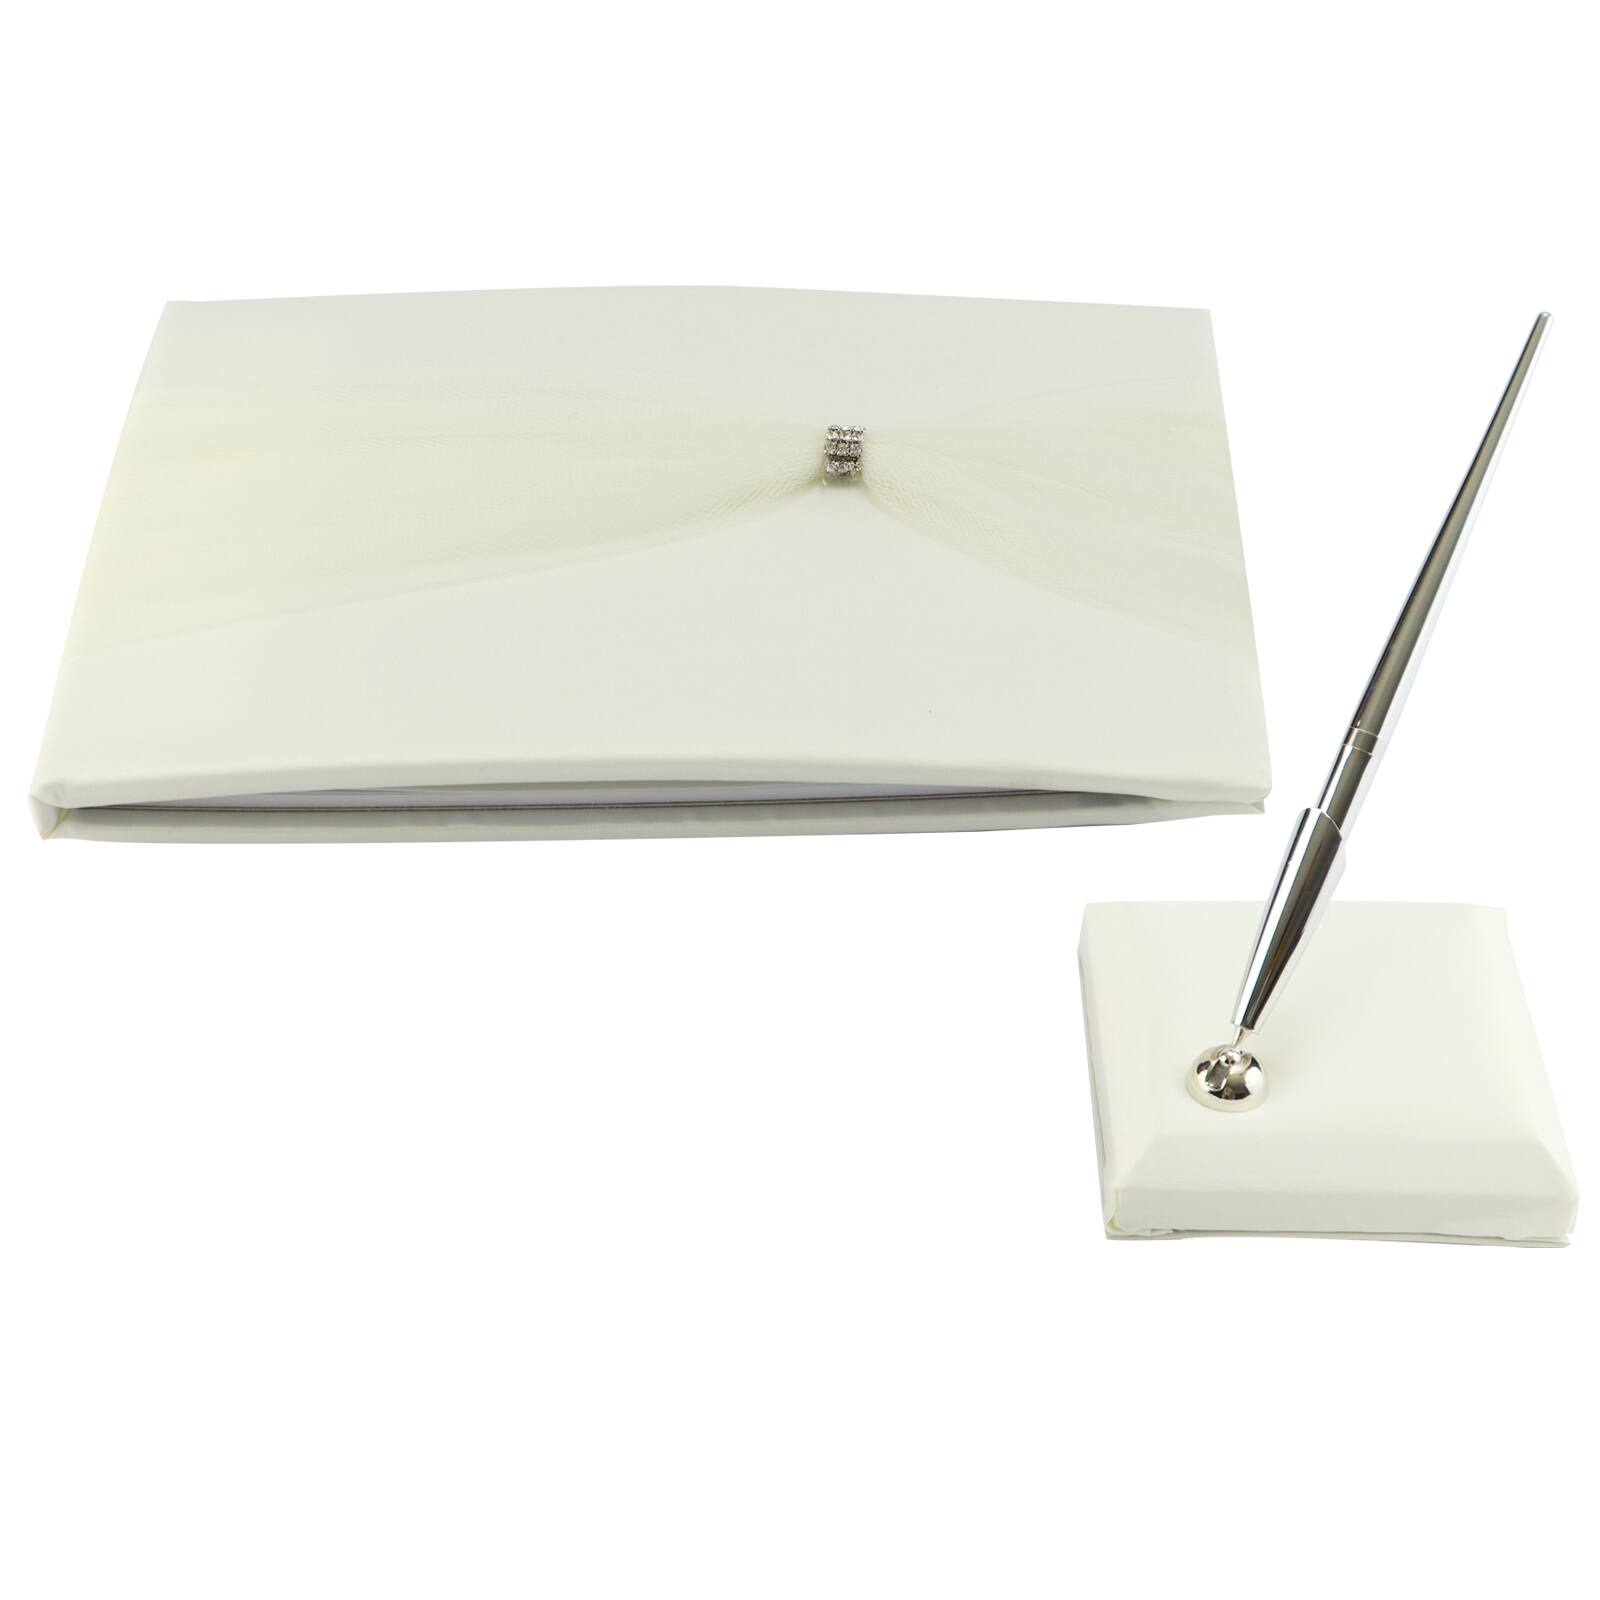 Wedding/Engagement Registry Office Signing Diamond Crystal Cut Pen/Guest Book 